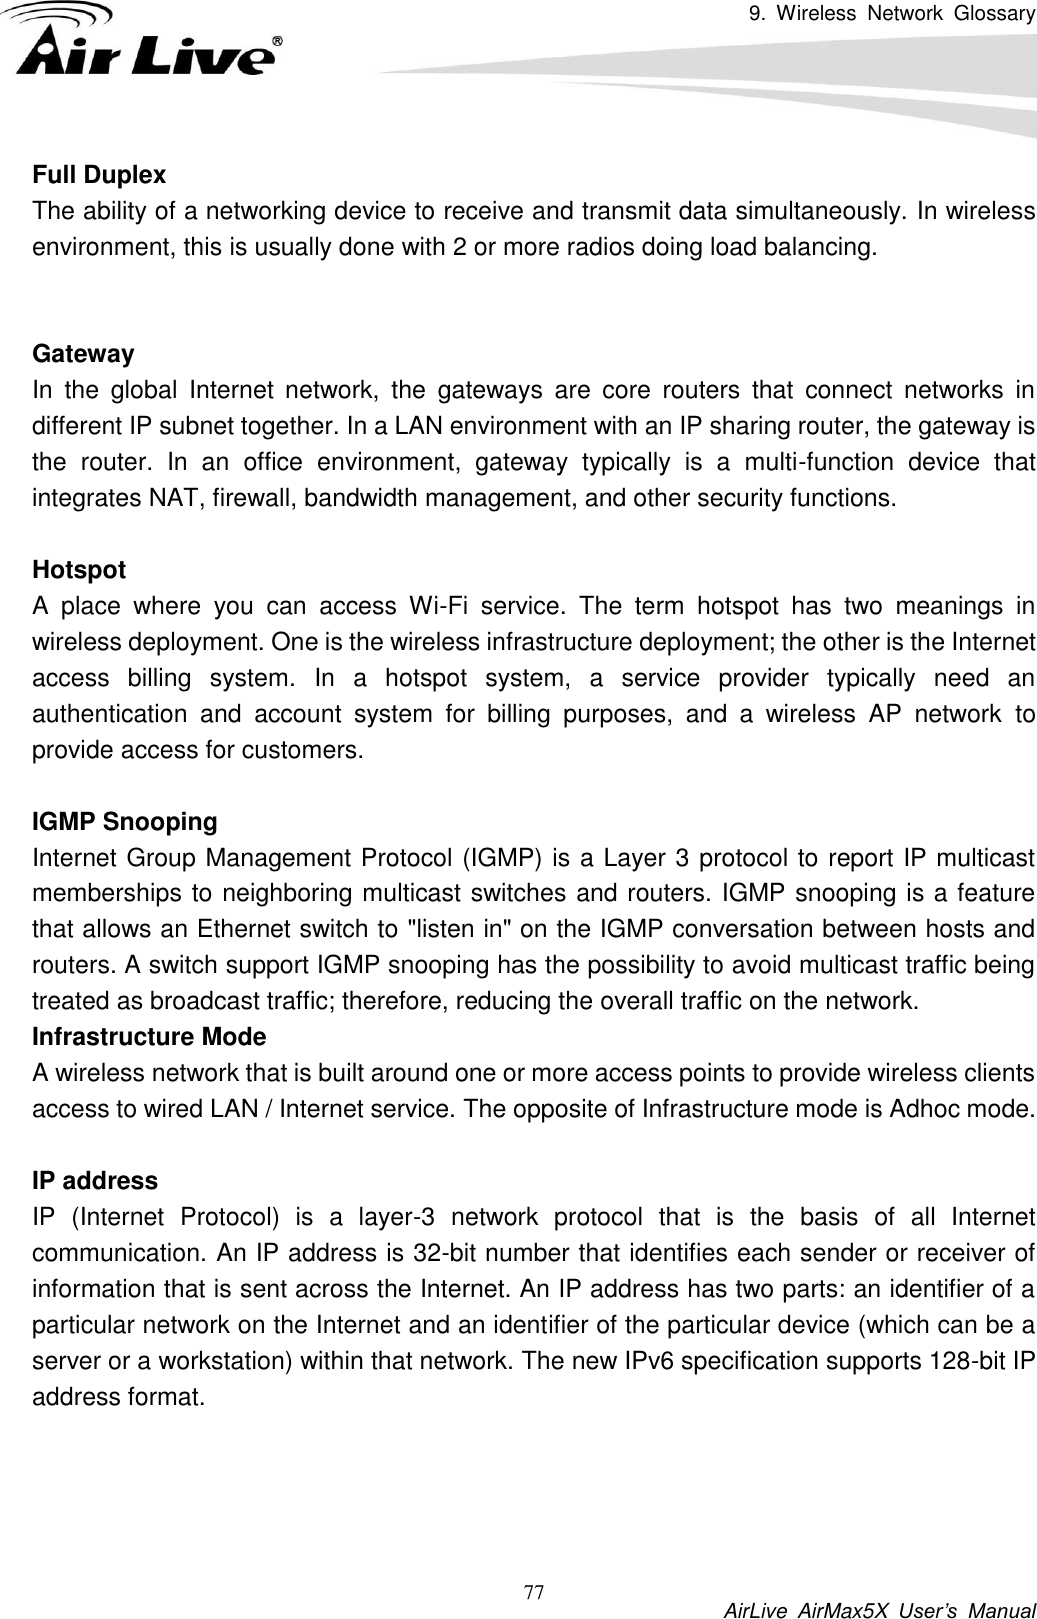 9.  Wireless  Network  Glossary           AirLive  AirMax5X  User’s  Manual 77 Full Duplex The ability of a networking device to receive and transmit data simultaneously. In wireless environment, this is usually done with 2 or more radios doing load balancing.   Gateway In  the  global  Internet  network,  the  gateways  are  core  routers  that  connect  networks  in different IP subnet together. In a LAN environment with an IP sharing router, the gateway is the  router.  In  an  office  environment,  gateway  typically  is  a  multi-function  device  that integrates NAT, firewall, bandwidth management, and other security functions.  Hotspot A  place  where  you  can  access  Wi-Fi  service.  The  term  hotspot  has  two  meanings  in wireless deployment. One is the wireless infrastructure deployment; the other is the Internet access  billing  system.  In  a  hotspot  system,  a  service  provider  typically  need  an authentication  and  account  system  for  billing  purposes,  and  a  wireless  AP  network  to provide access for customers.  IGMP Snooping Internet Group Management Protocol (IGMP) is a Layer 3 protocol to report IP multicast memberships to neighboring multicast switches and routers. IGMP snooping is a feature that allows an Ethernet switch to &quot;listen in&quot; on the IGMP conversation between hosts and routers. A switch support IGMP snooping has the possibility to avoid multicast traffic being treated as broadcast traffic; therefore, reducing the overall traffic on the network. Infrastructure Mode A wireless network that is built around one or more access points to provide wireless clients access to wired LAN / Internet service. The opposite of Infrastructure mode is Adhoc mode.  IP address IP  (Internet  Protocol)  is  a  layer-3  network  protocol  that  is  the  basis  of  all  Internet communication. An IP address is 32-bit number that identifies each sender or receiver of information that is sent across the Internet. An IP address has two parts: an identifier of a particular network on the Internet and an identifier of the particular device (which can be a server or a workstation) within that network. The new IPv6 specification supports 128-bit IP address format.     